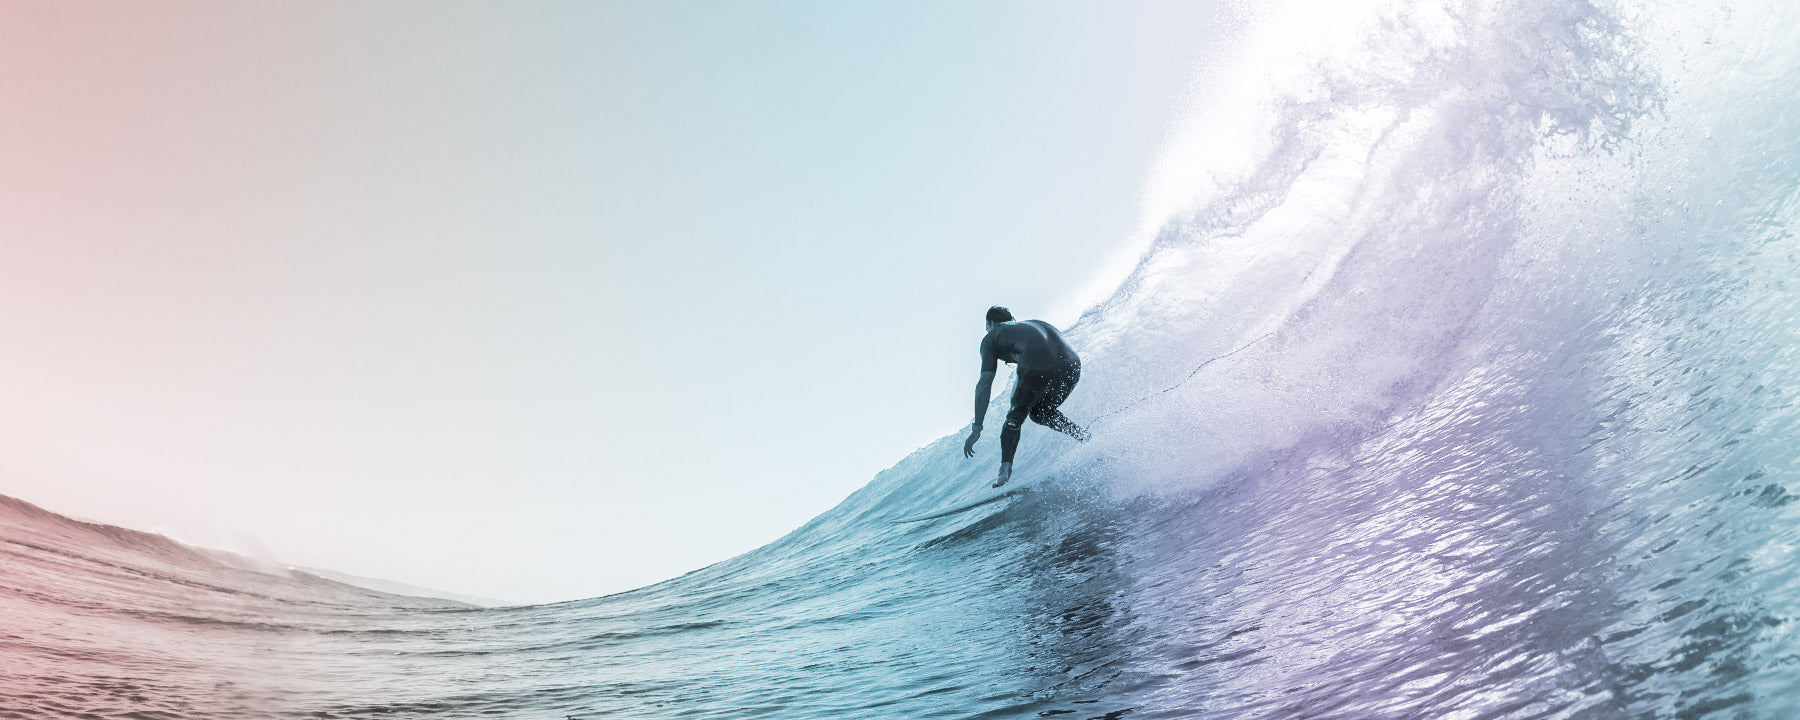 Why Bottom Out When You Can 'Bottom Turn'? - a blog by HeySurf